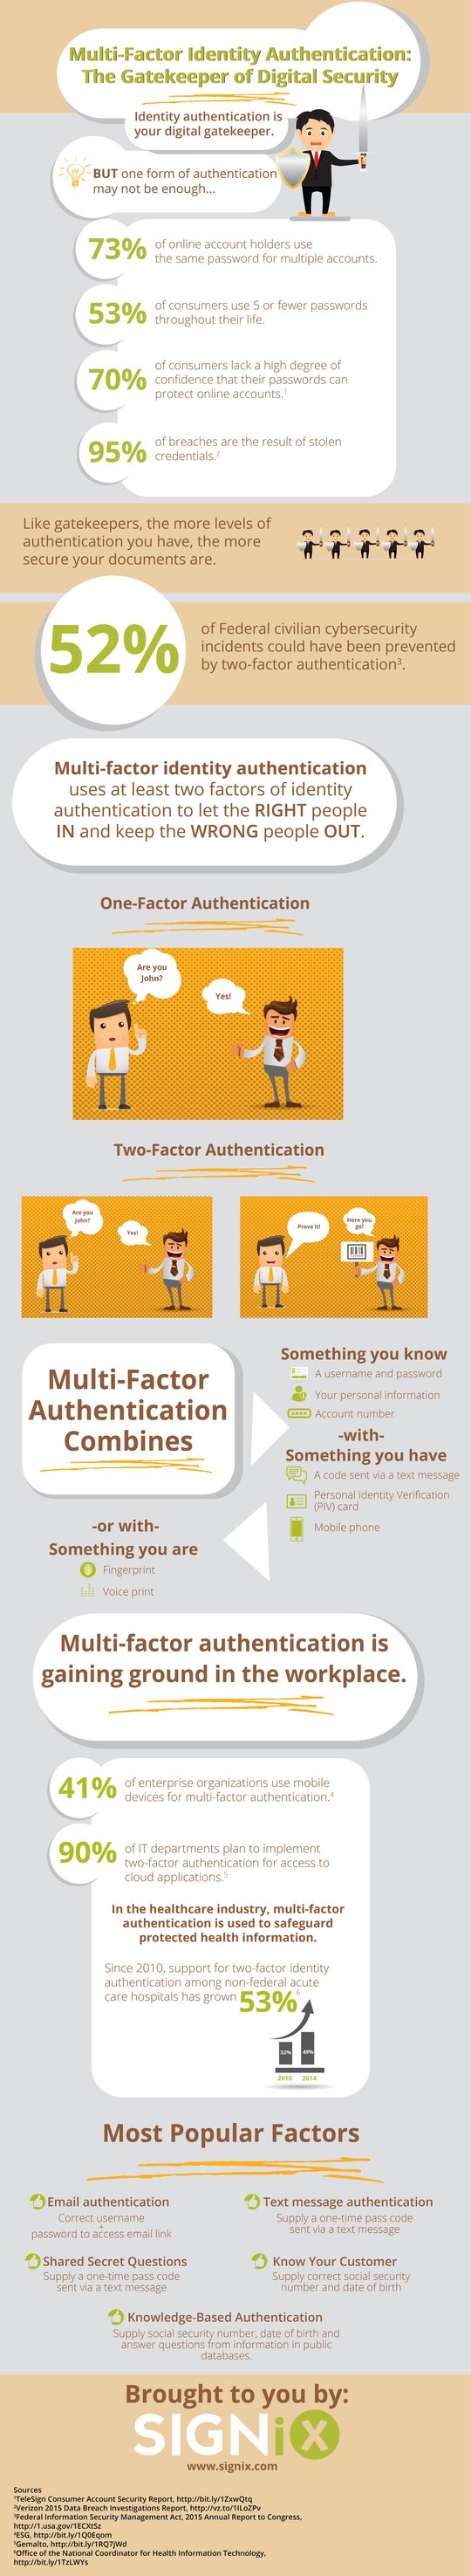 Multi-Factor Identity Authentication: The Gatekeeper of Digital Security